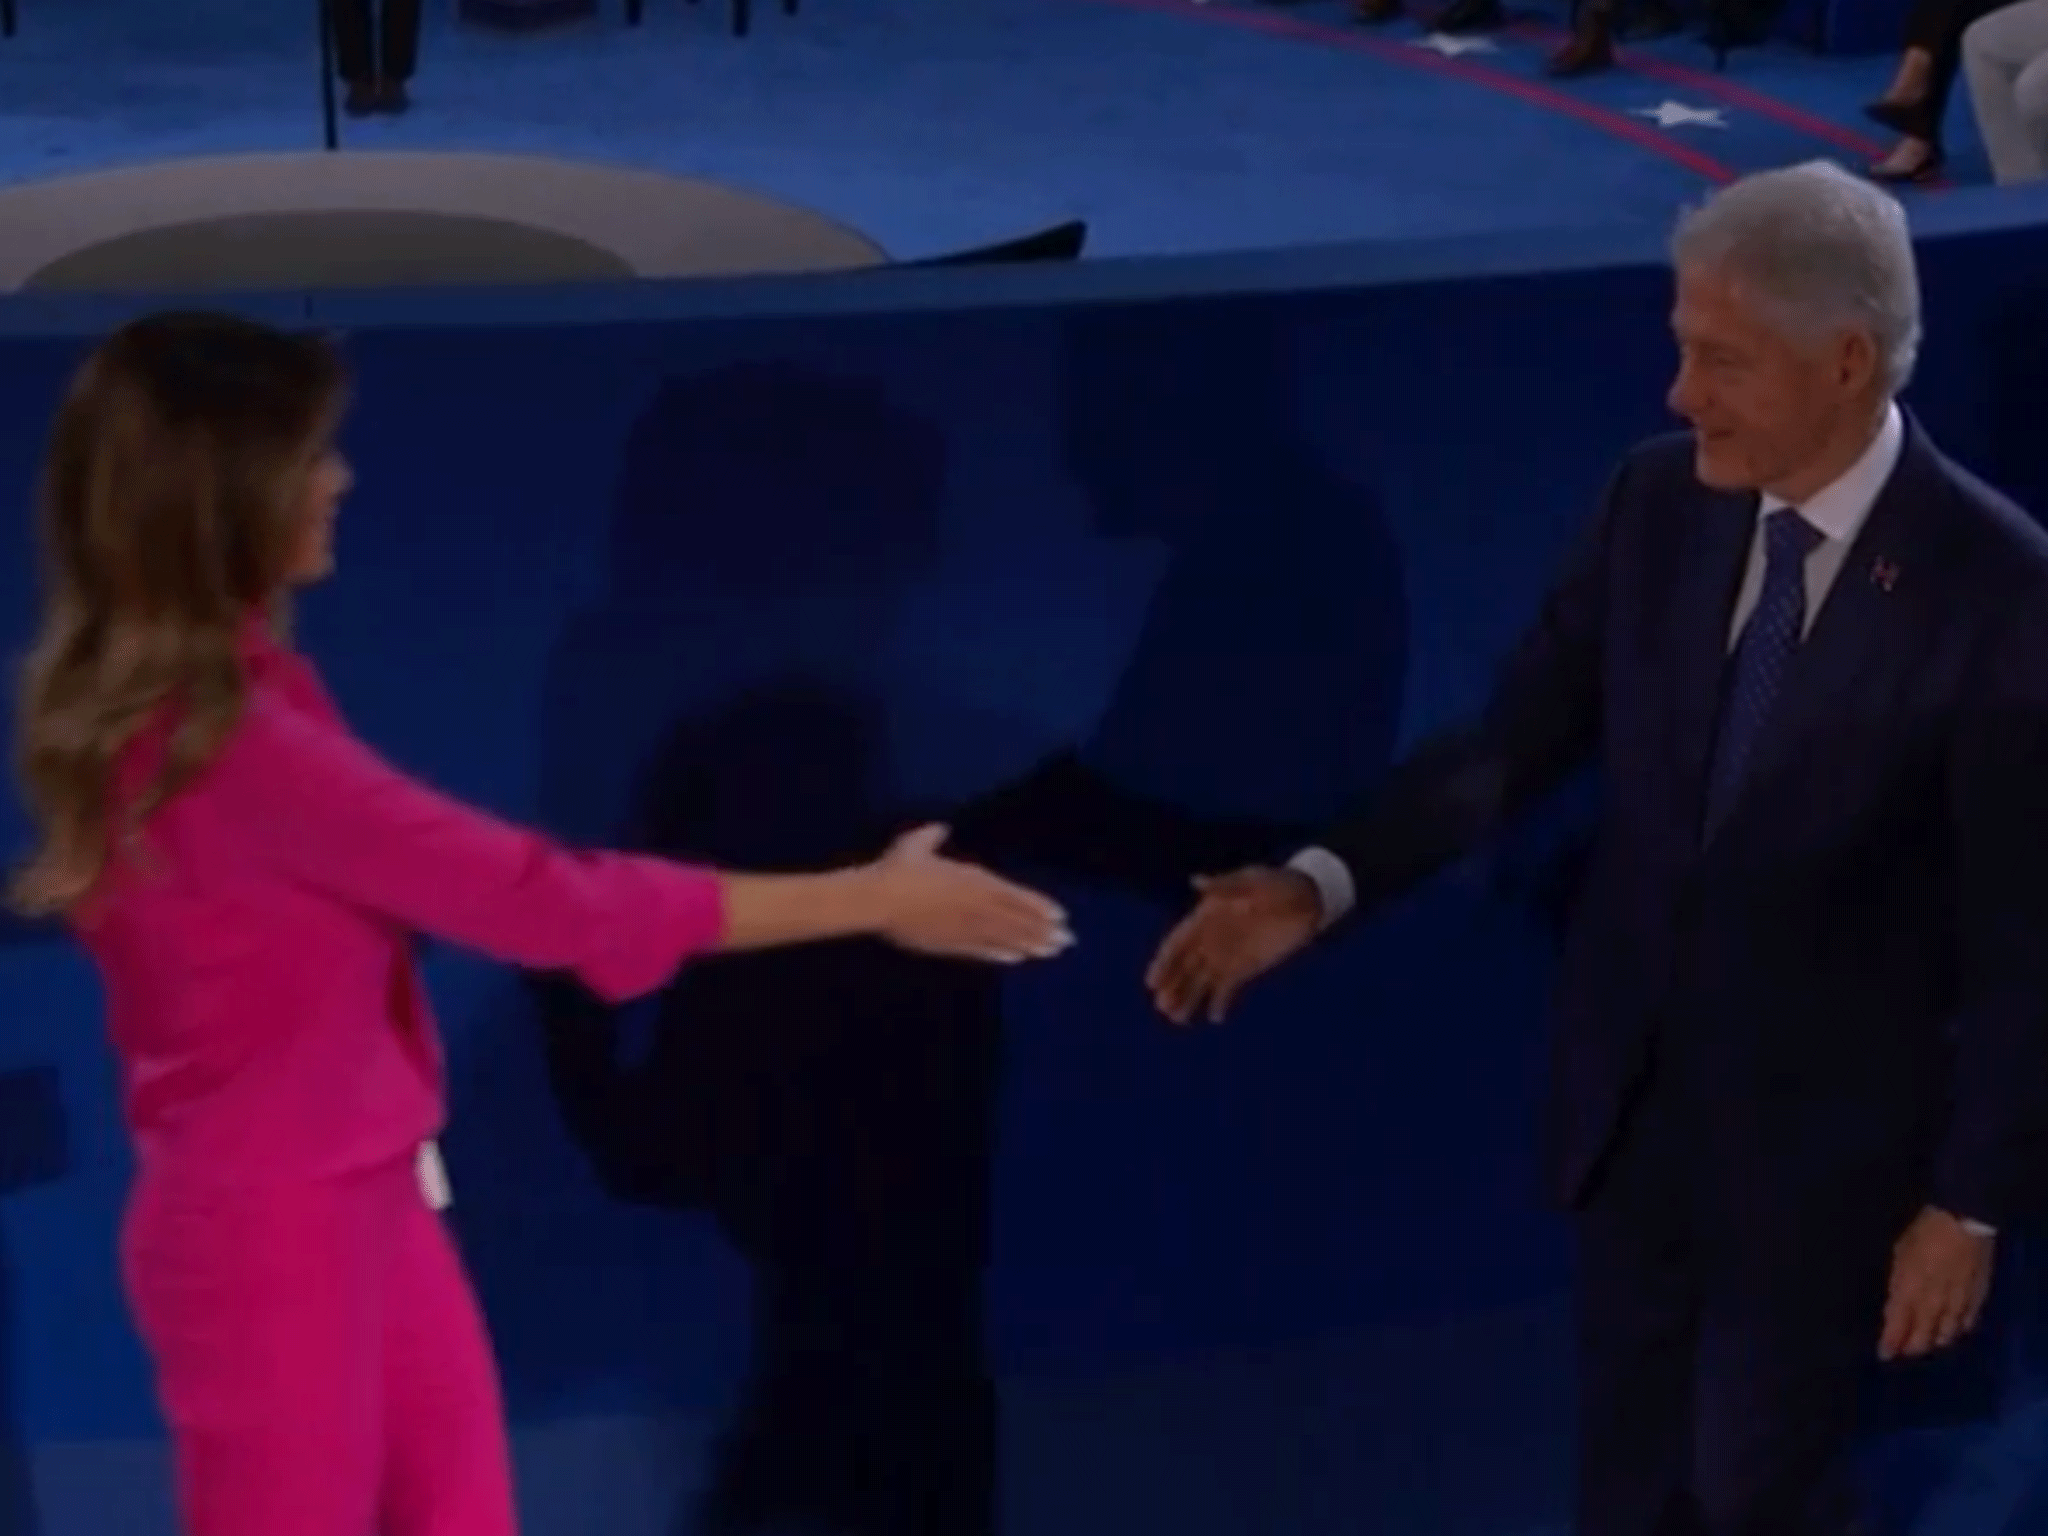 Presidential debate: Bill Clinton shares awkward handshake with Donald Trump's family after Republican candidate accuses him of abuse